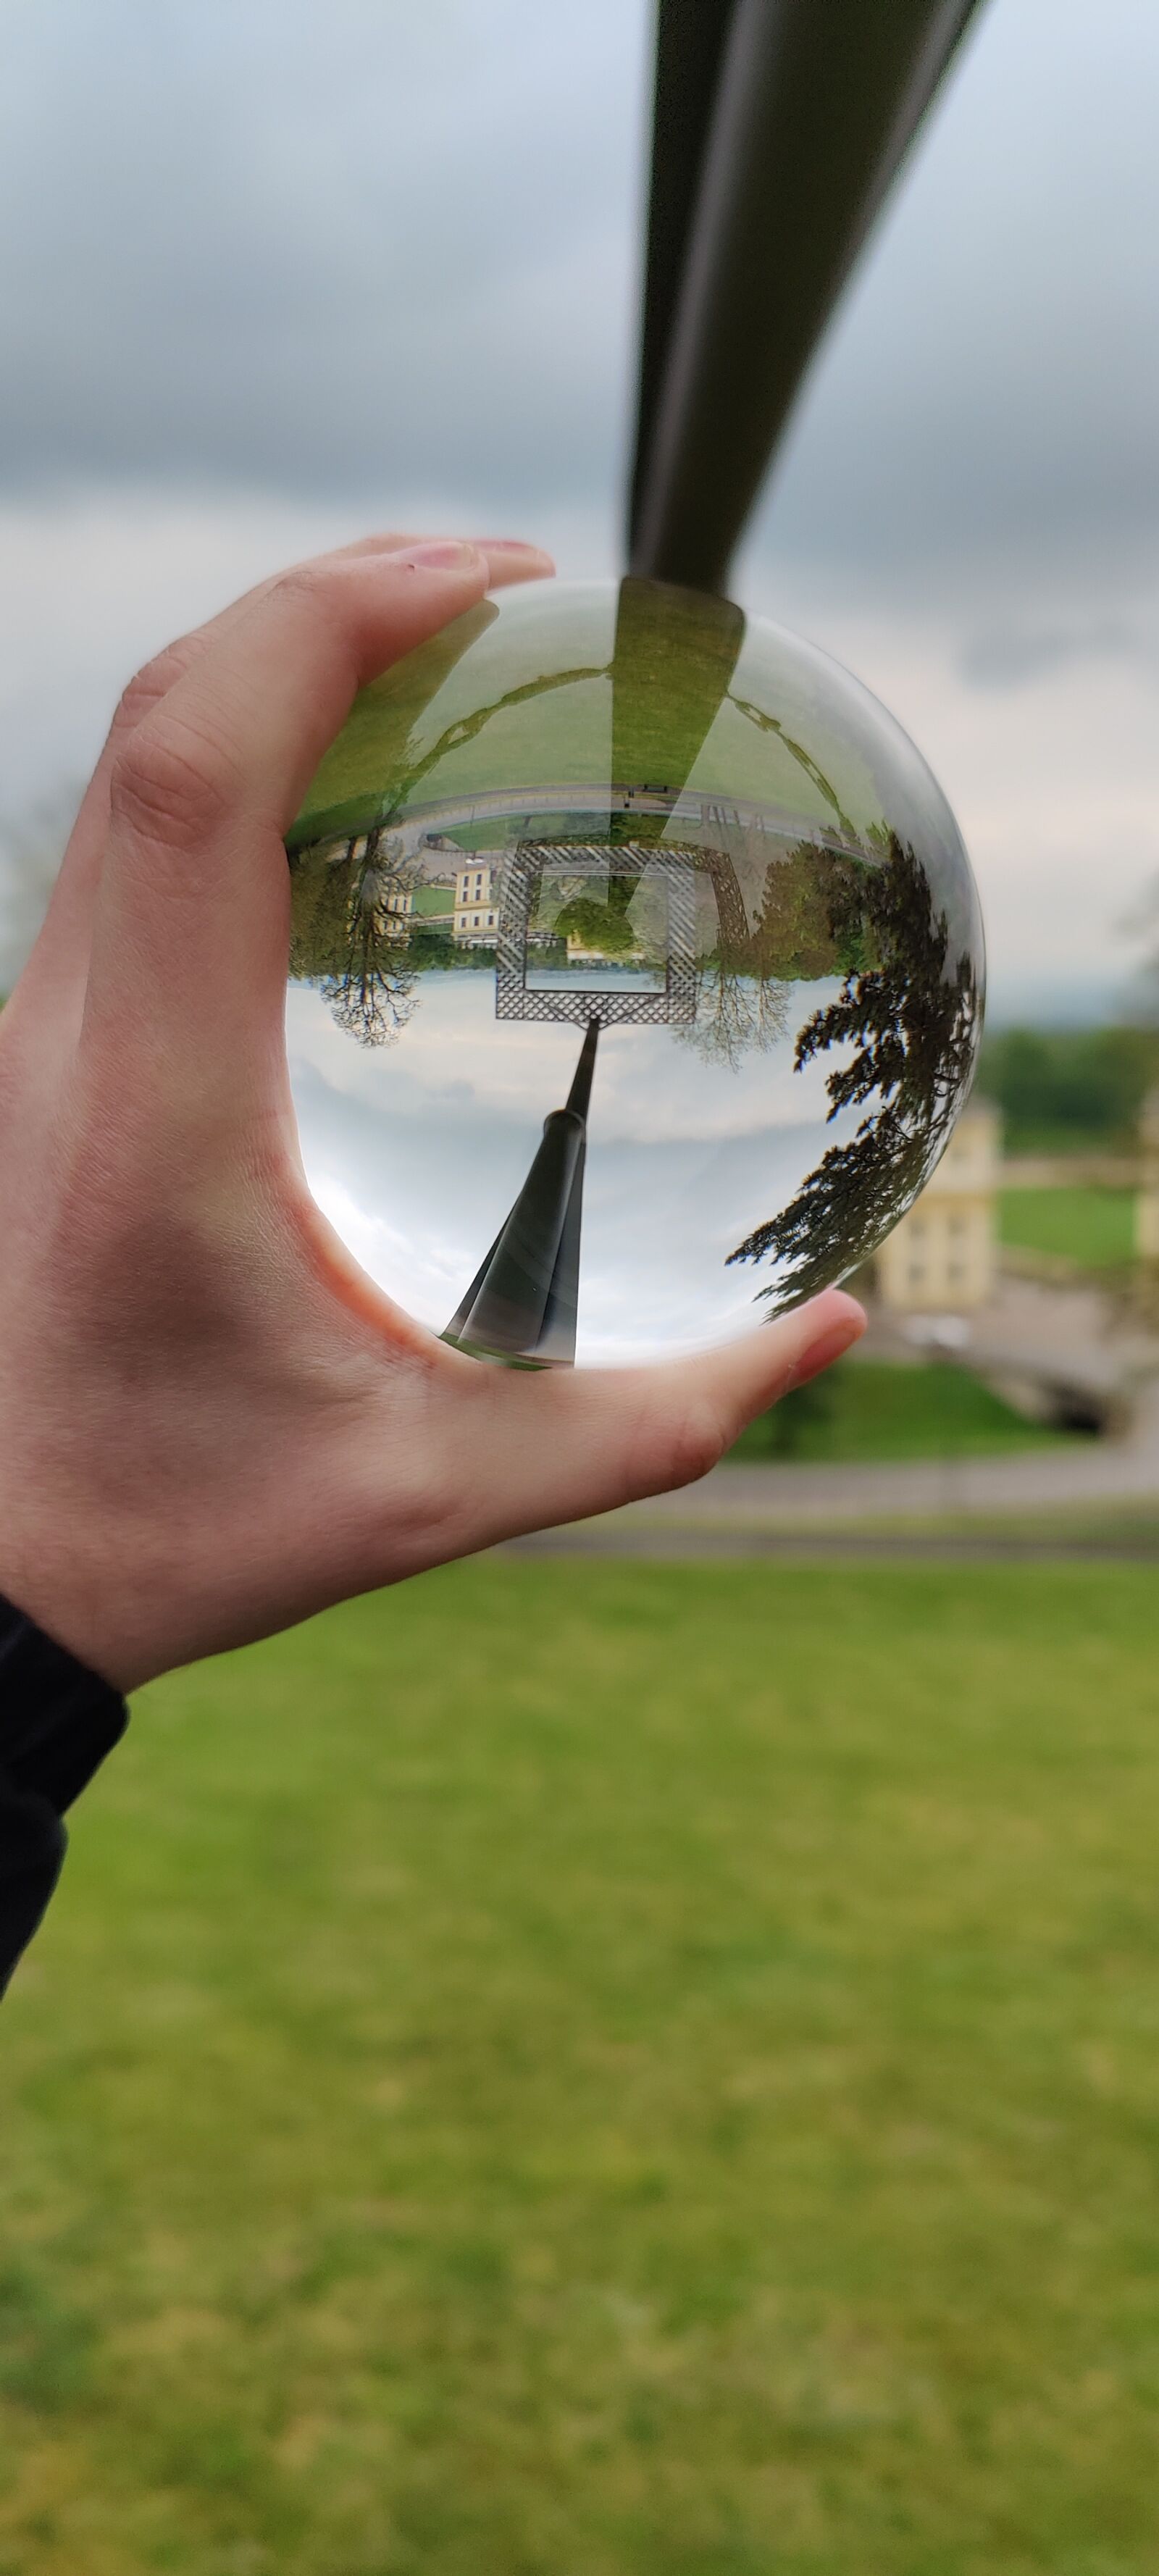 OnePlus IN2023 sample photo. Lensball, nature, landscape photography